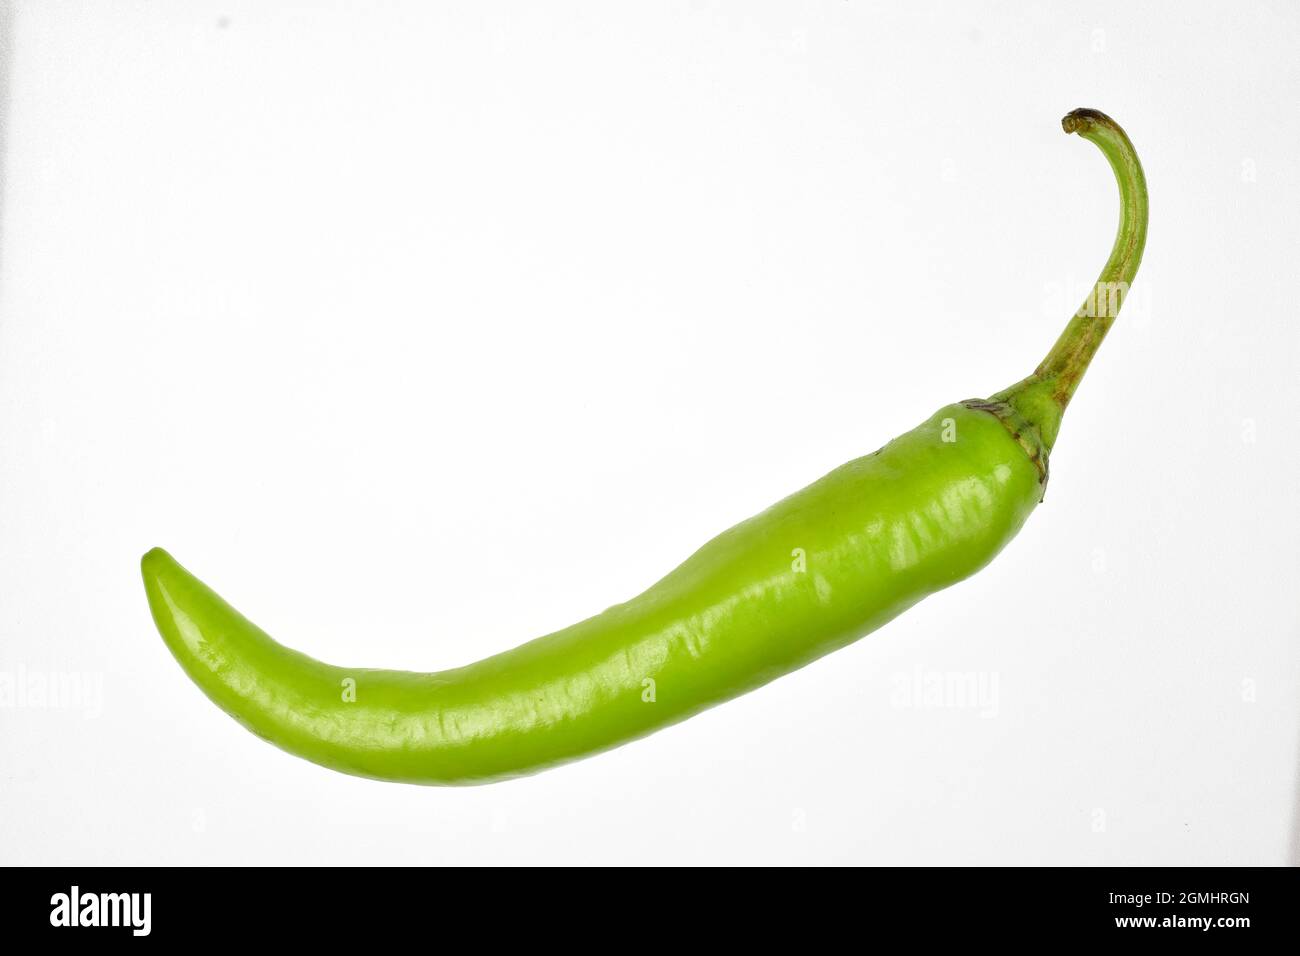 Top view of green chilly isolated on white background with clipping path Stock Photo